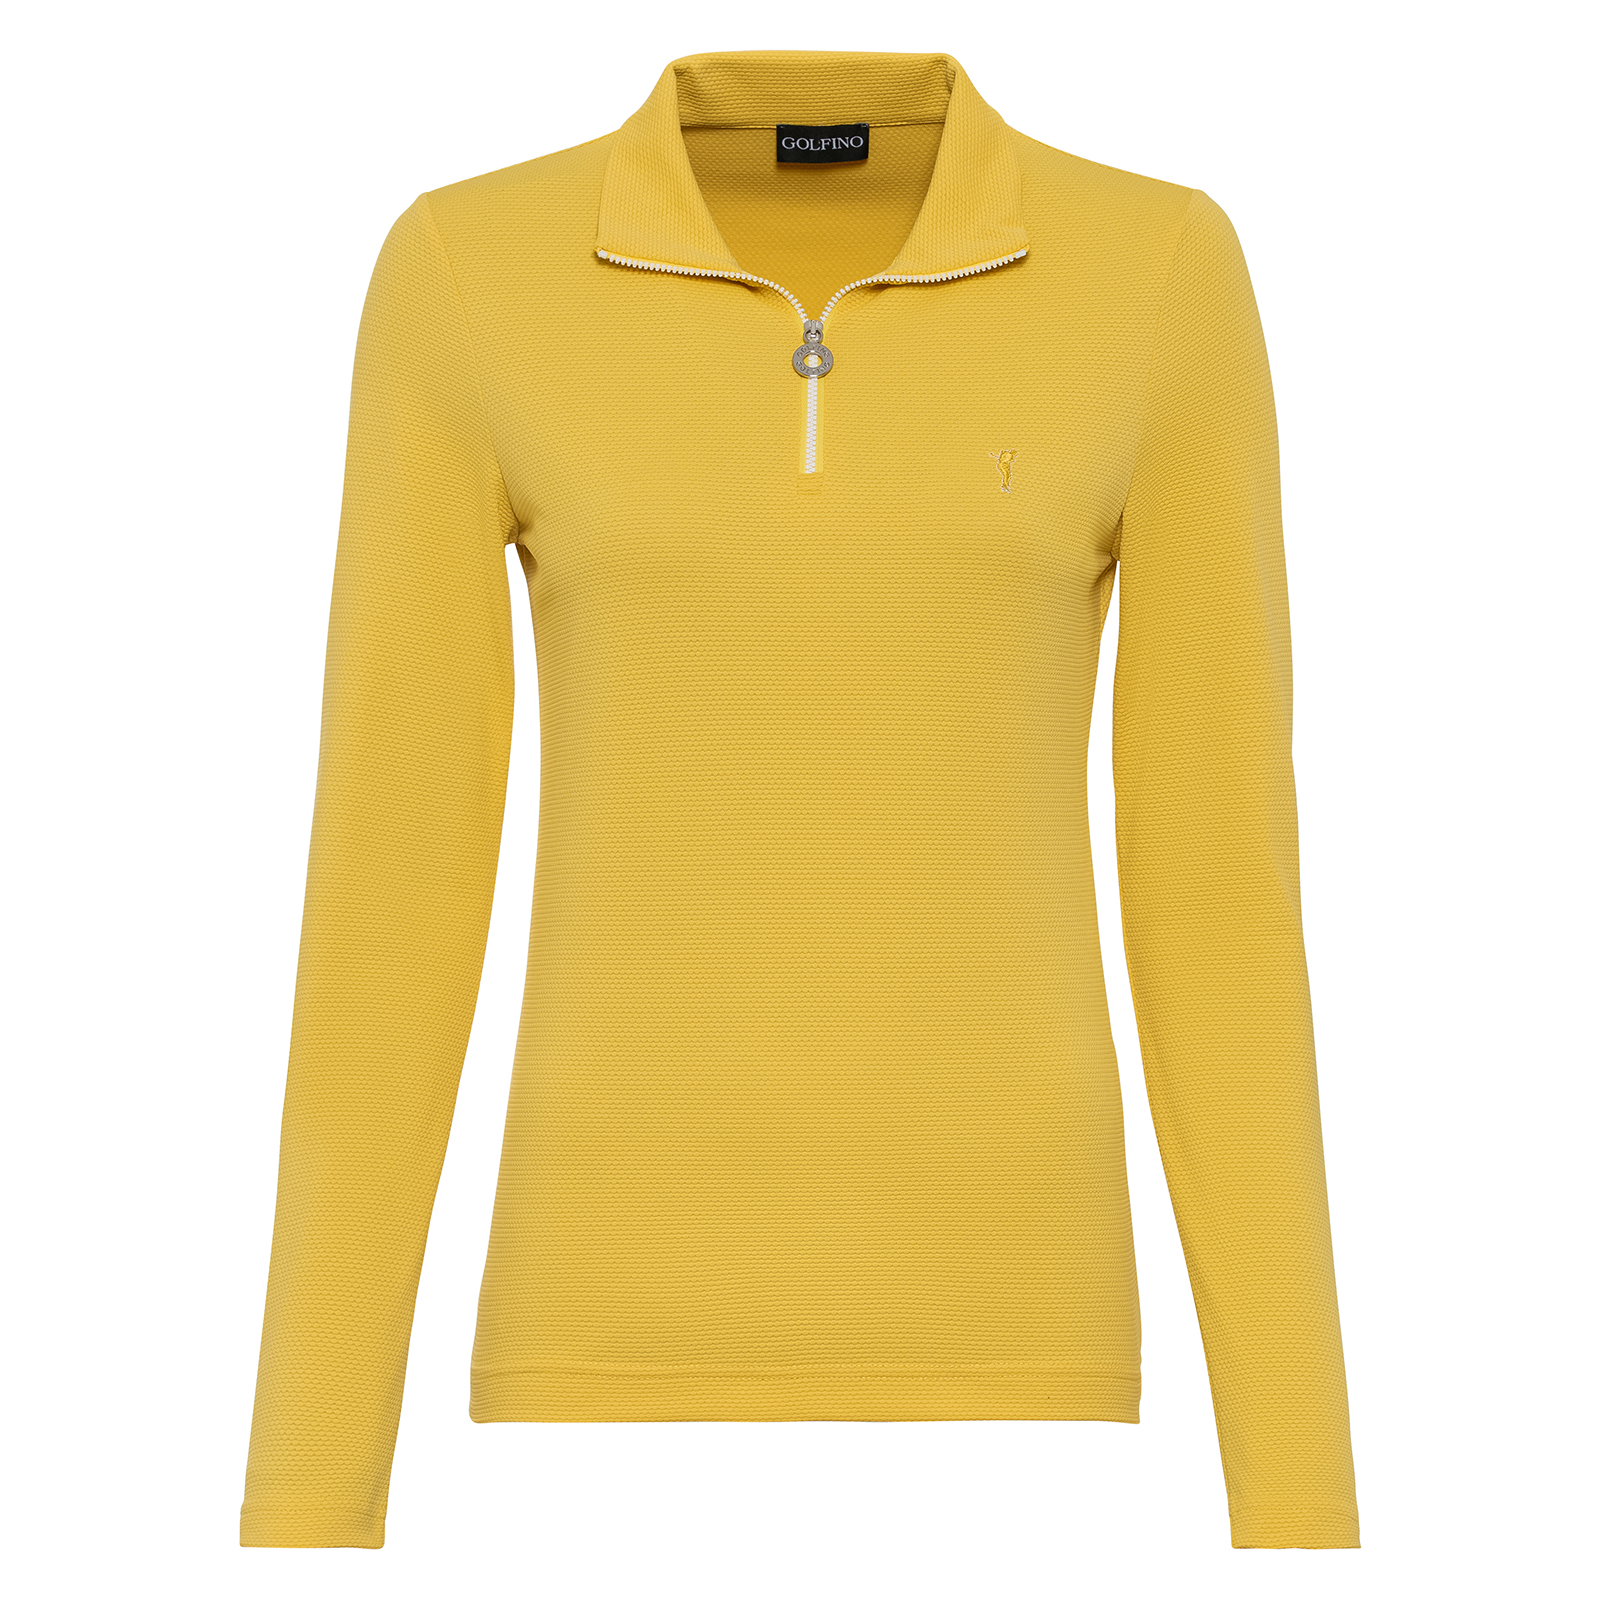 Ladies' moisture-wicking long-sleeved golf shirt in bubble jacquard